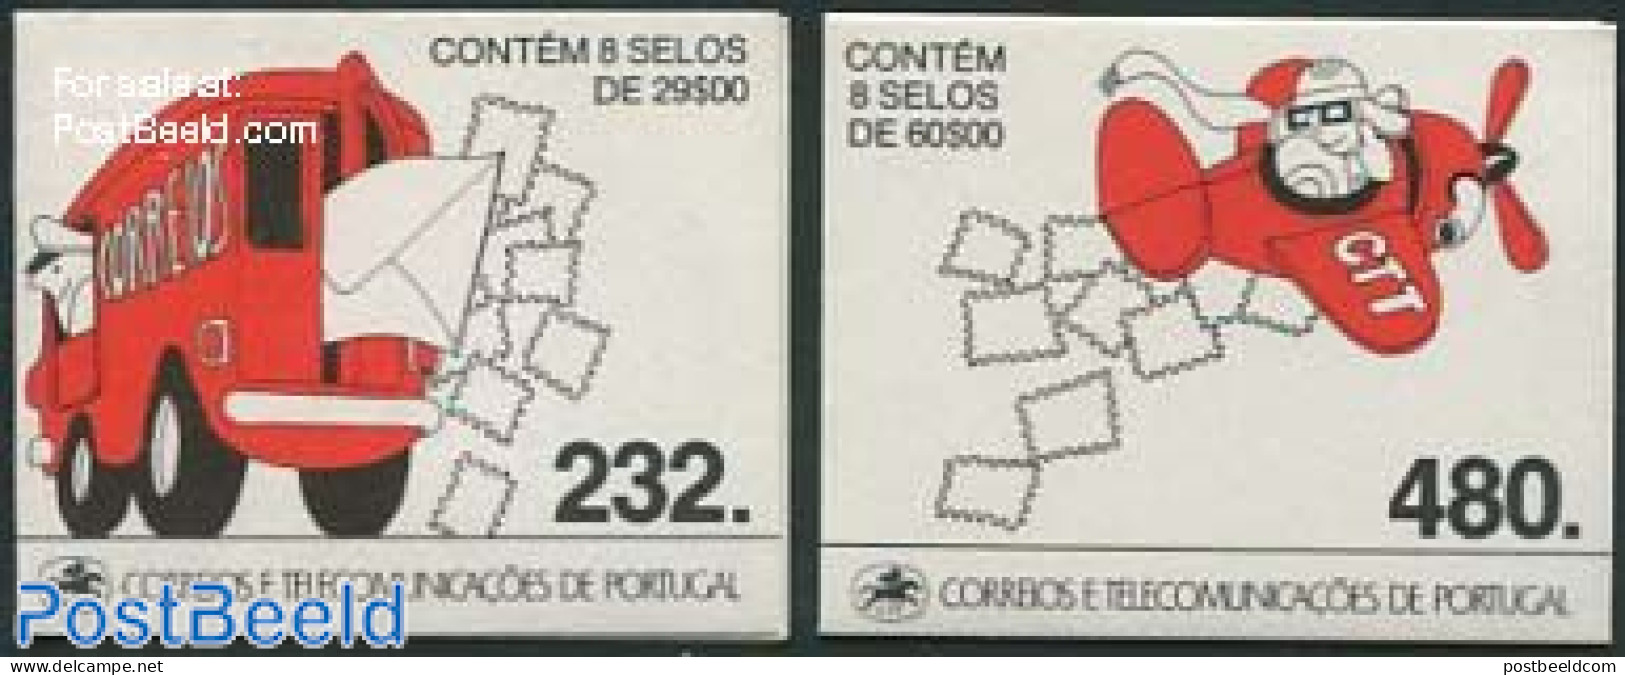 Portugal 1989 Greetings 2 Booklets, Mint NH, Post - Stamp Booklets - Ungebraucht